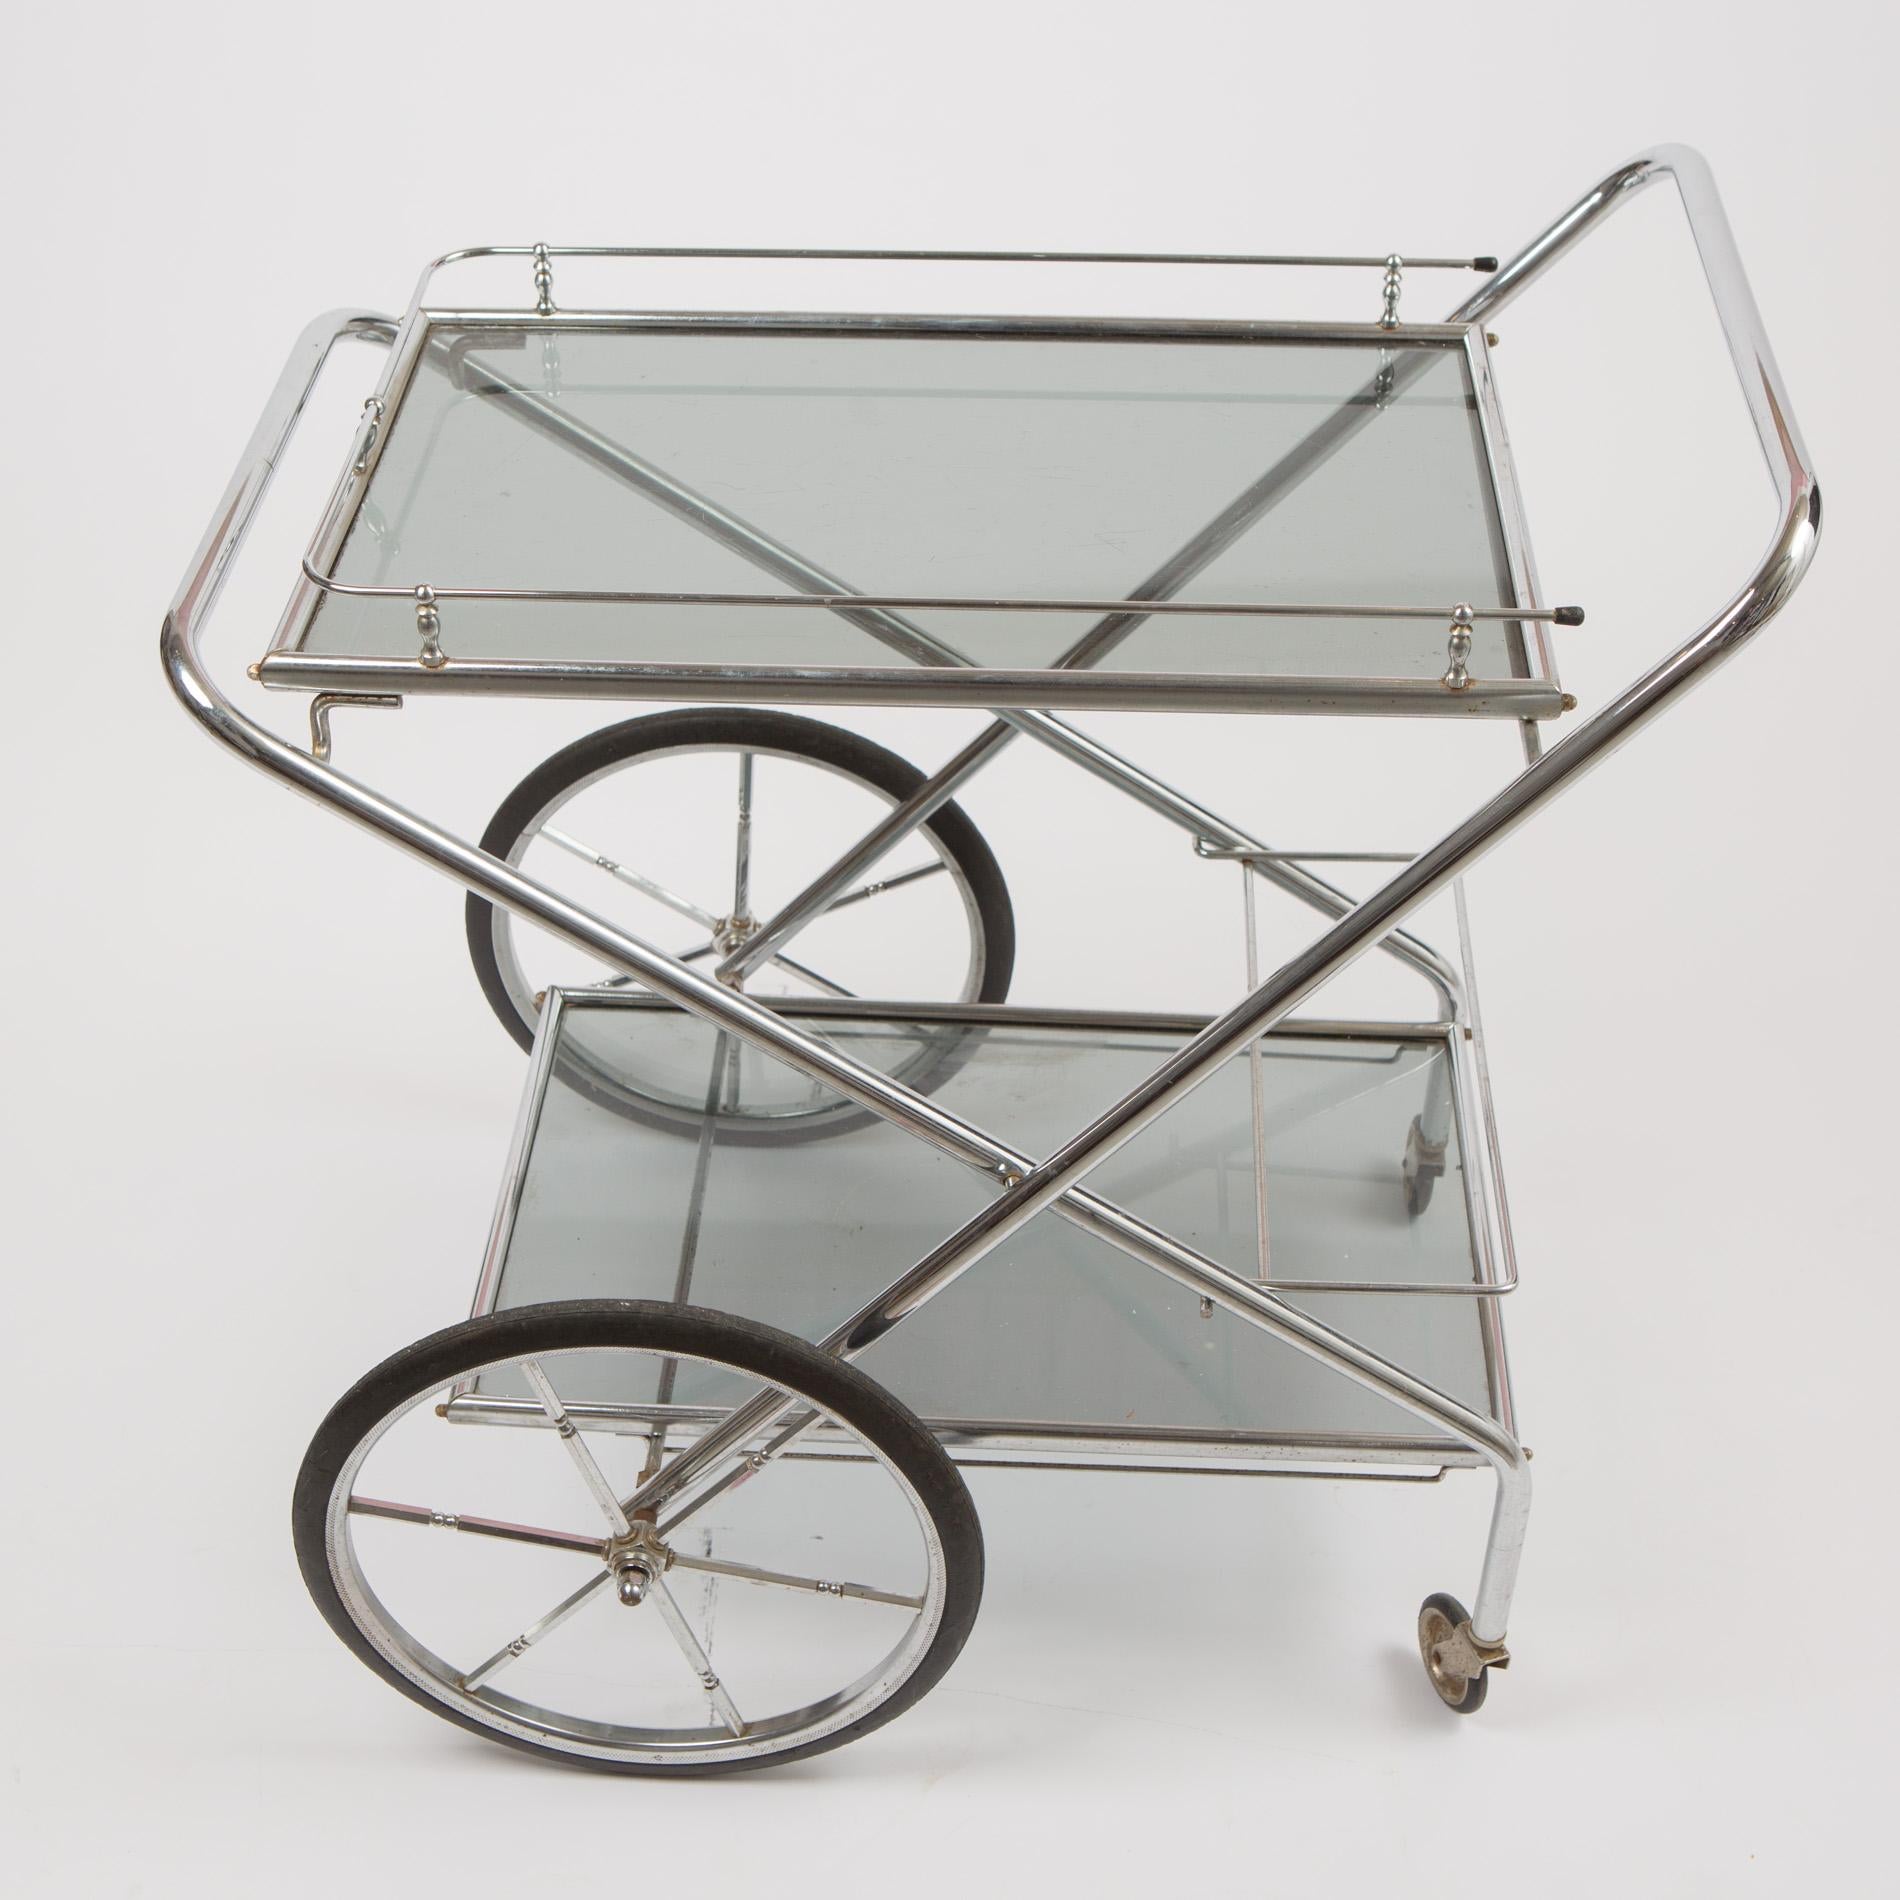 Chic chrome drinks trolley with two Smokey glass shelves and oversized wheels. Tubular frame supports both shelves and creates a handle to one side. The top shelf is surrounded by a decorative curved chrome frame, the bottom shelf features a bottle